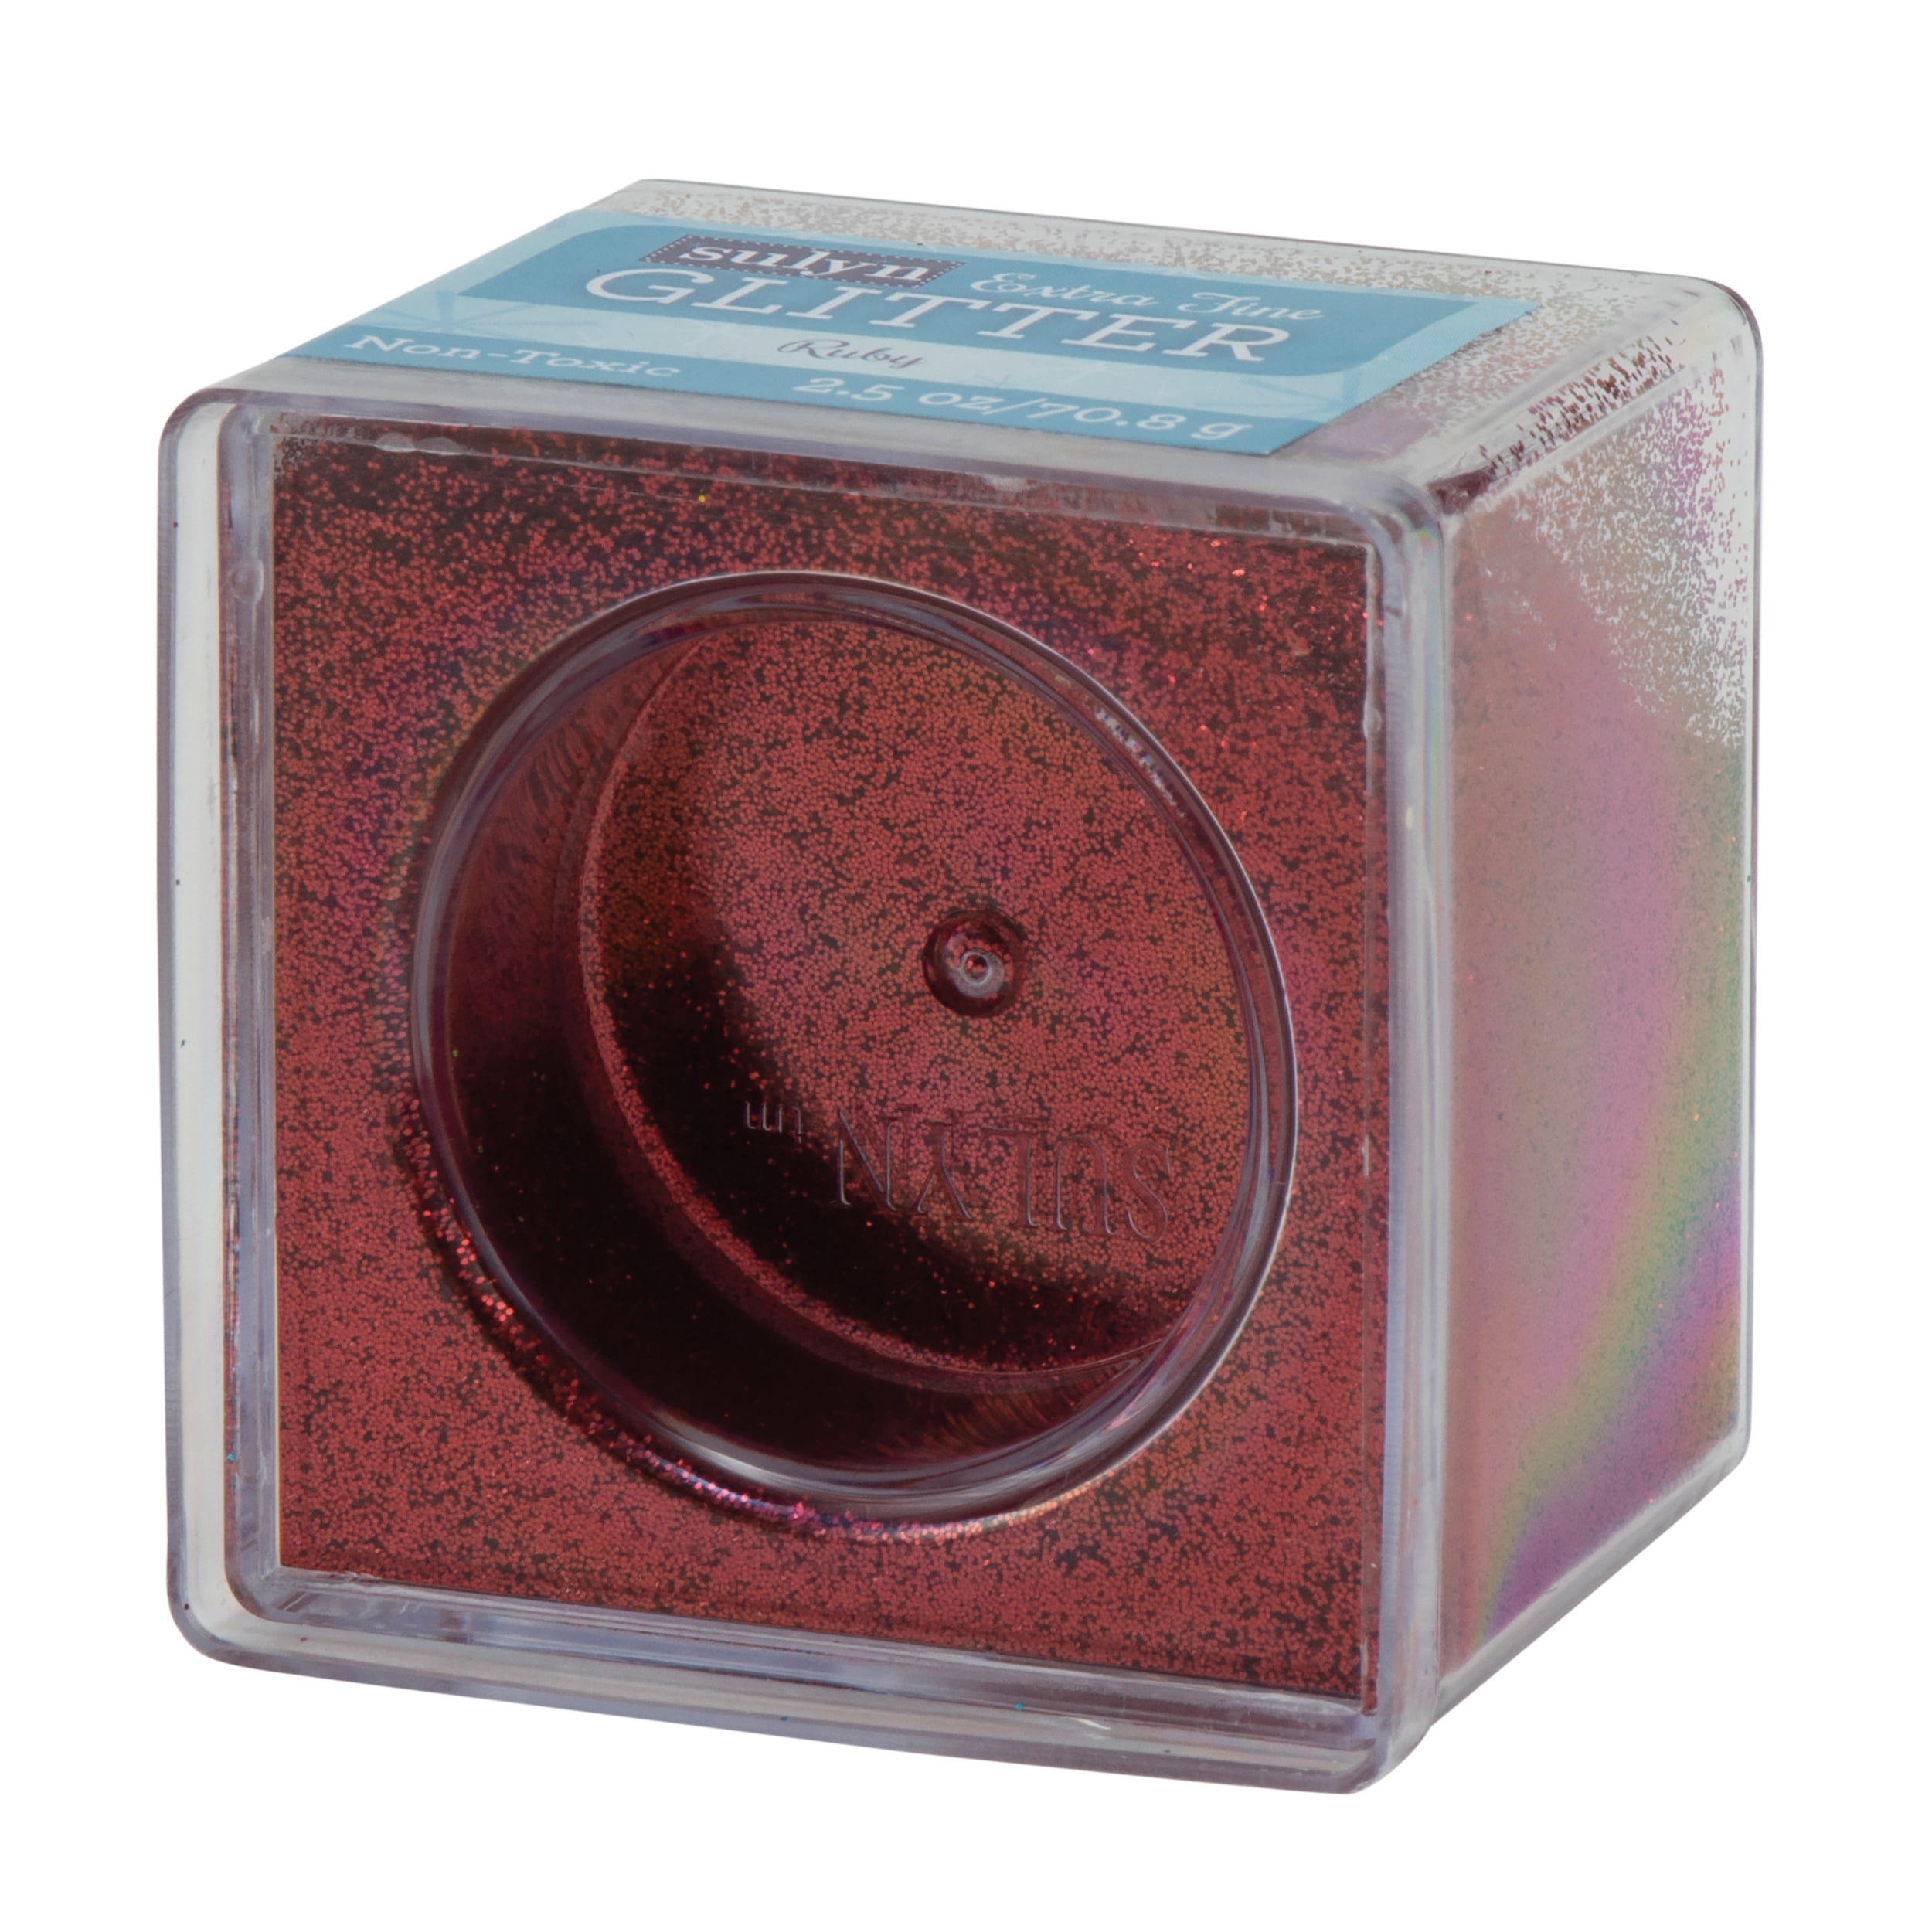 Sulyn Extra Fine Cameo Pink Glitter - 2.5 oz